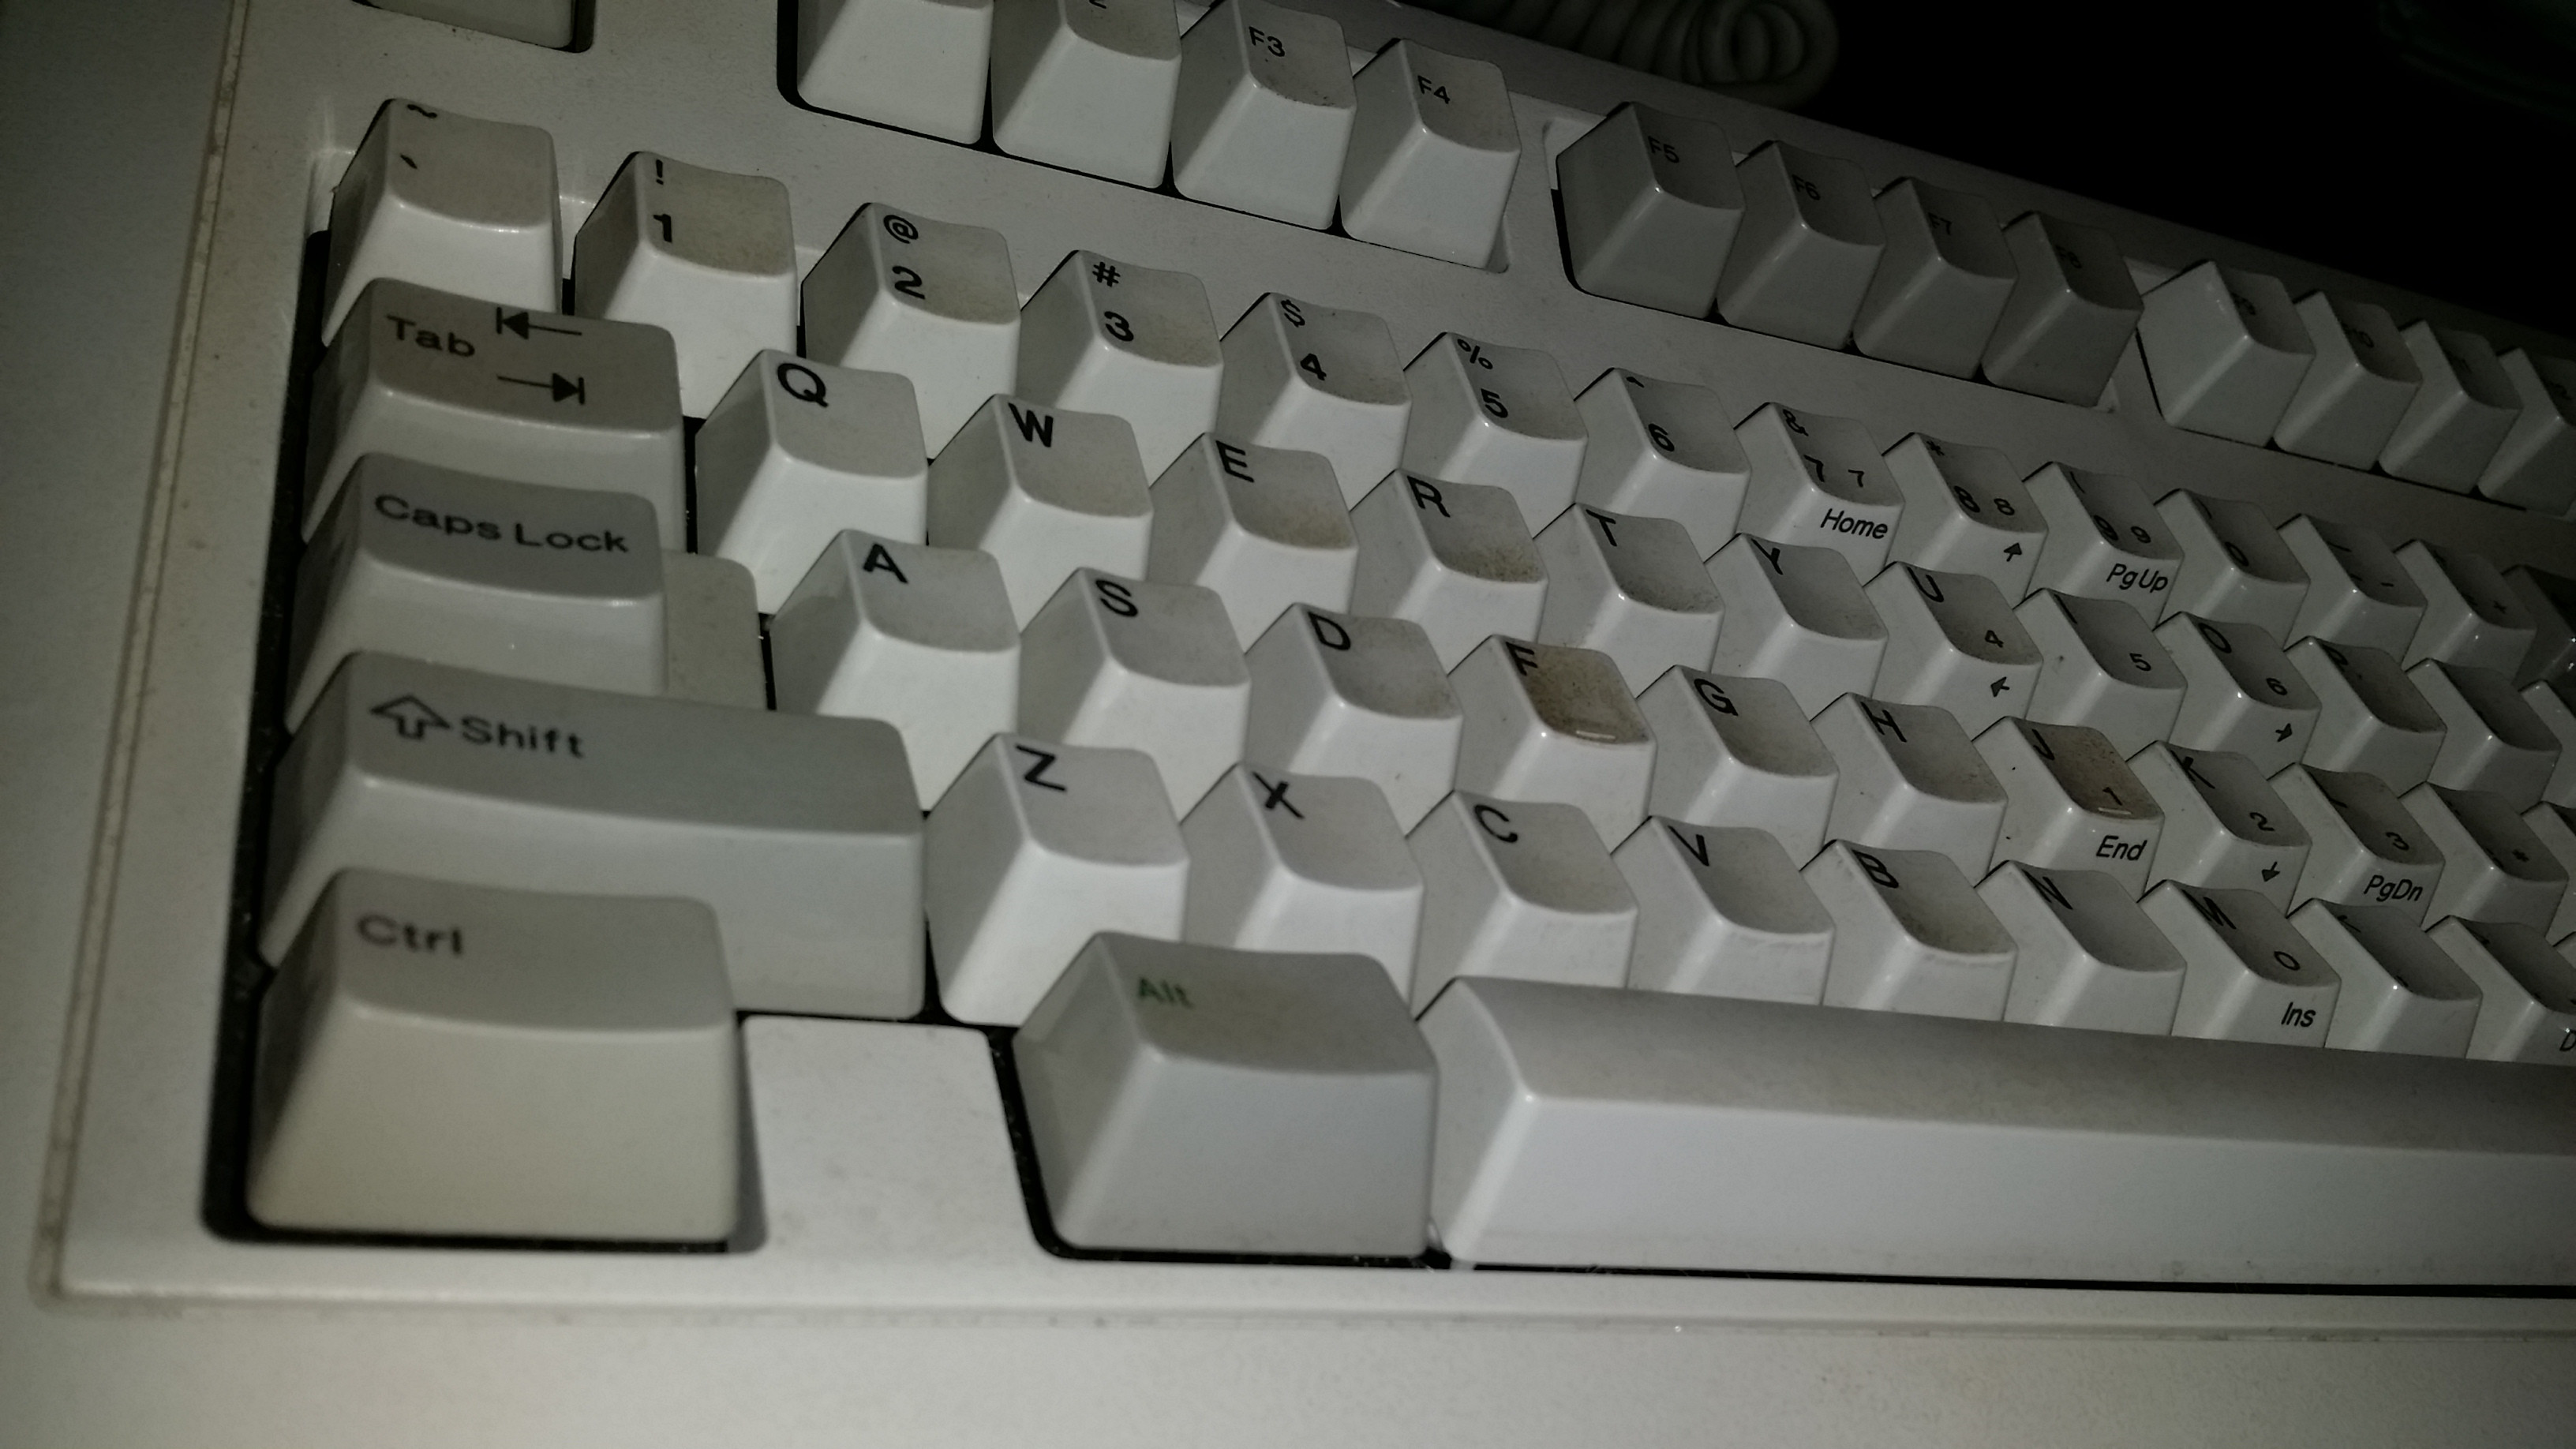 Was missing the Ctrl key, but I snagged one from another I had found